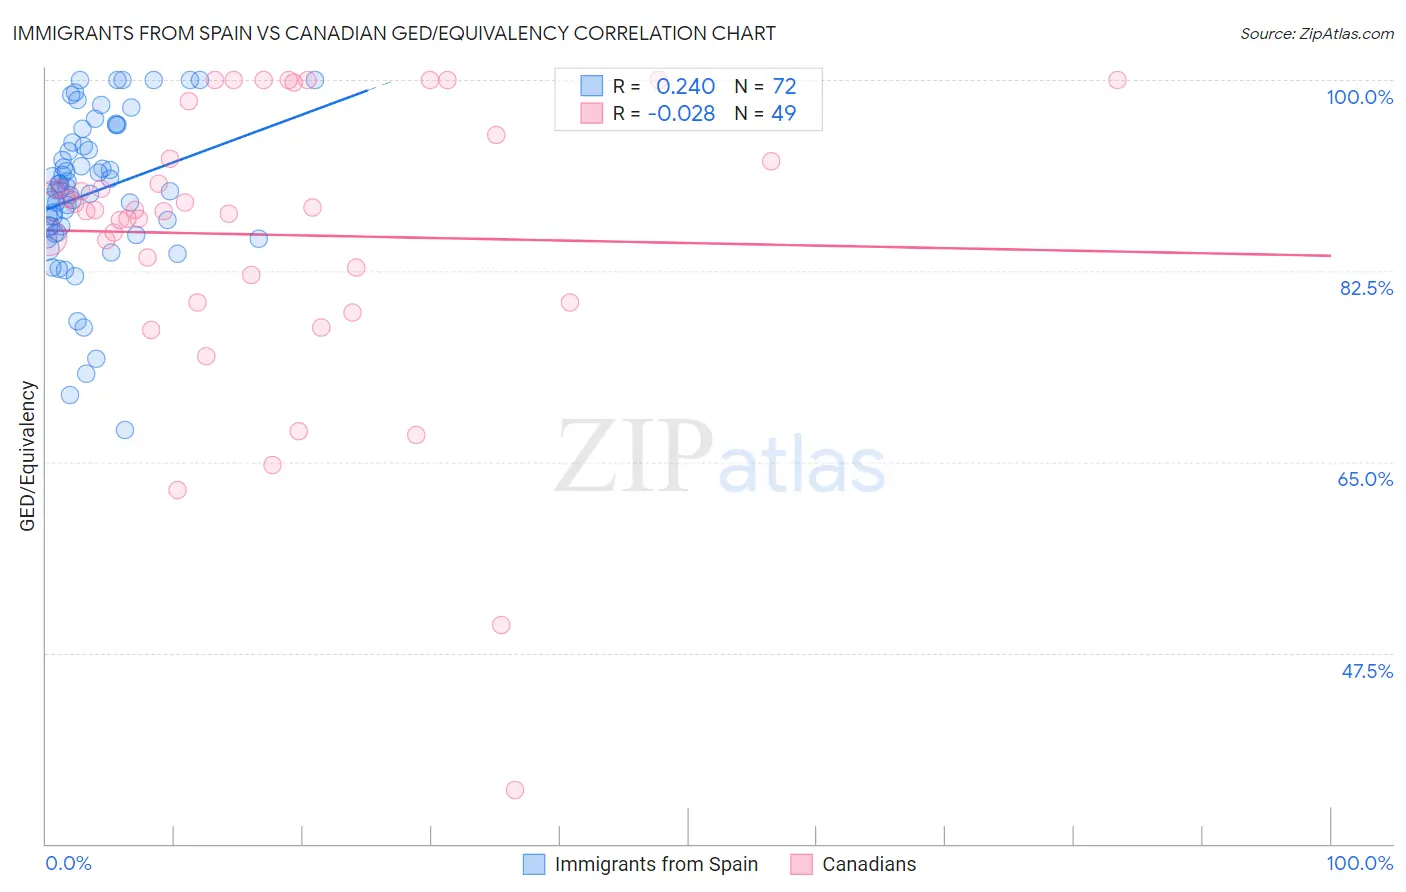 Immigrants from Spain vs Canadian GED/Equivalency